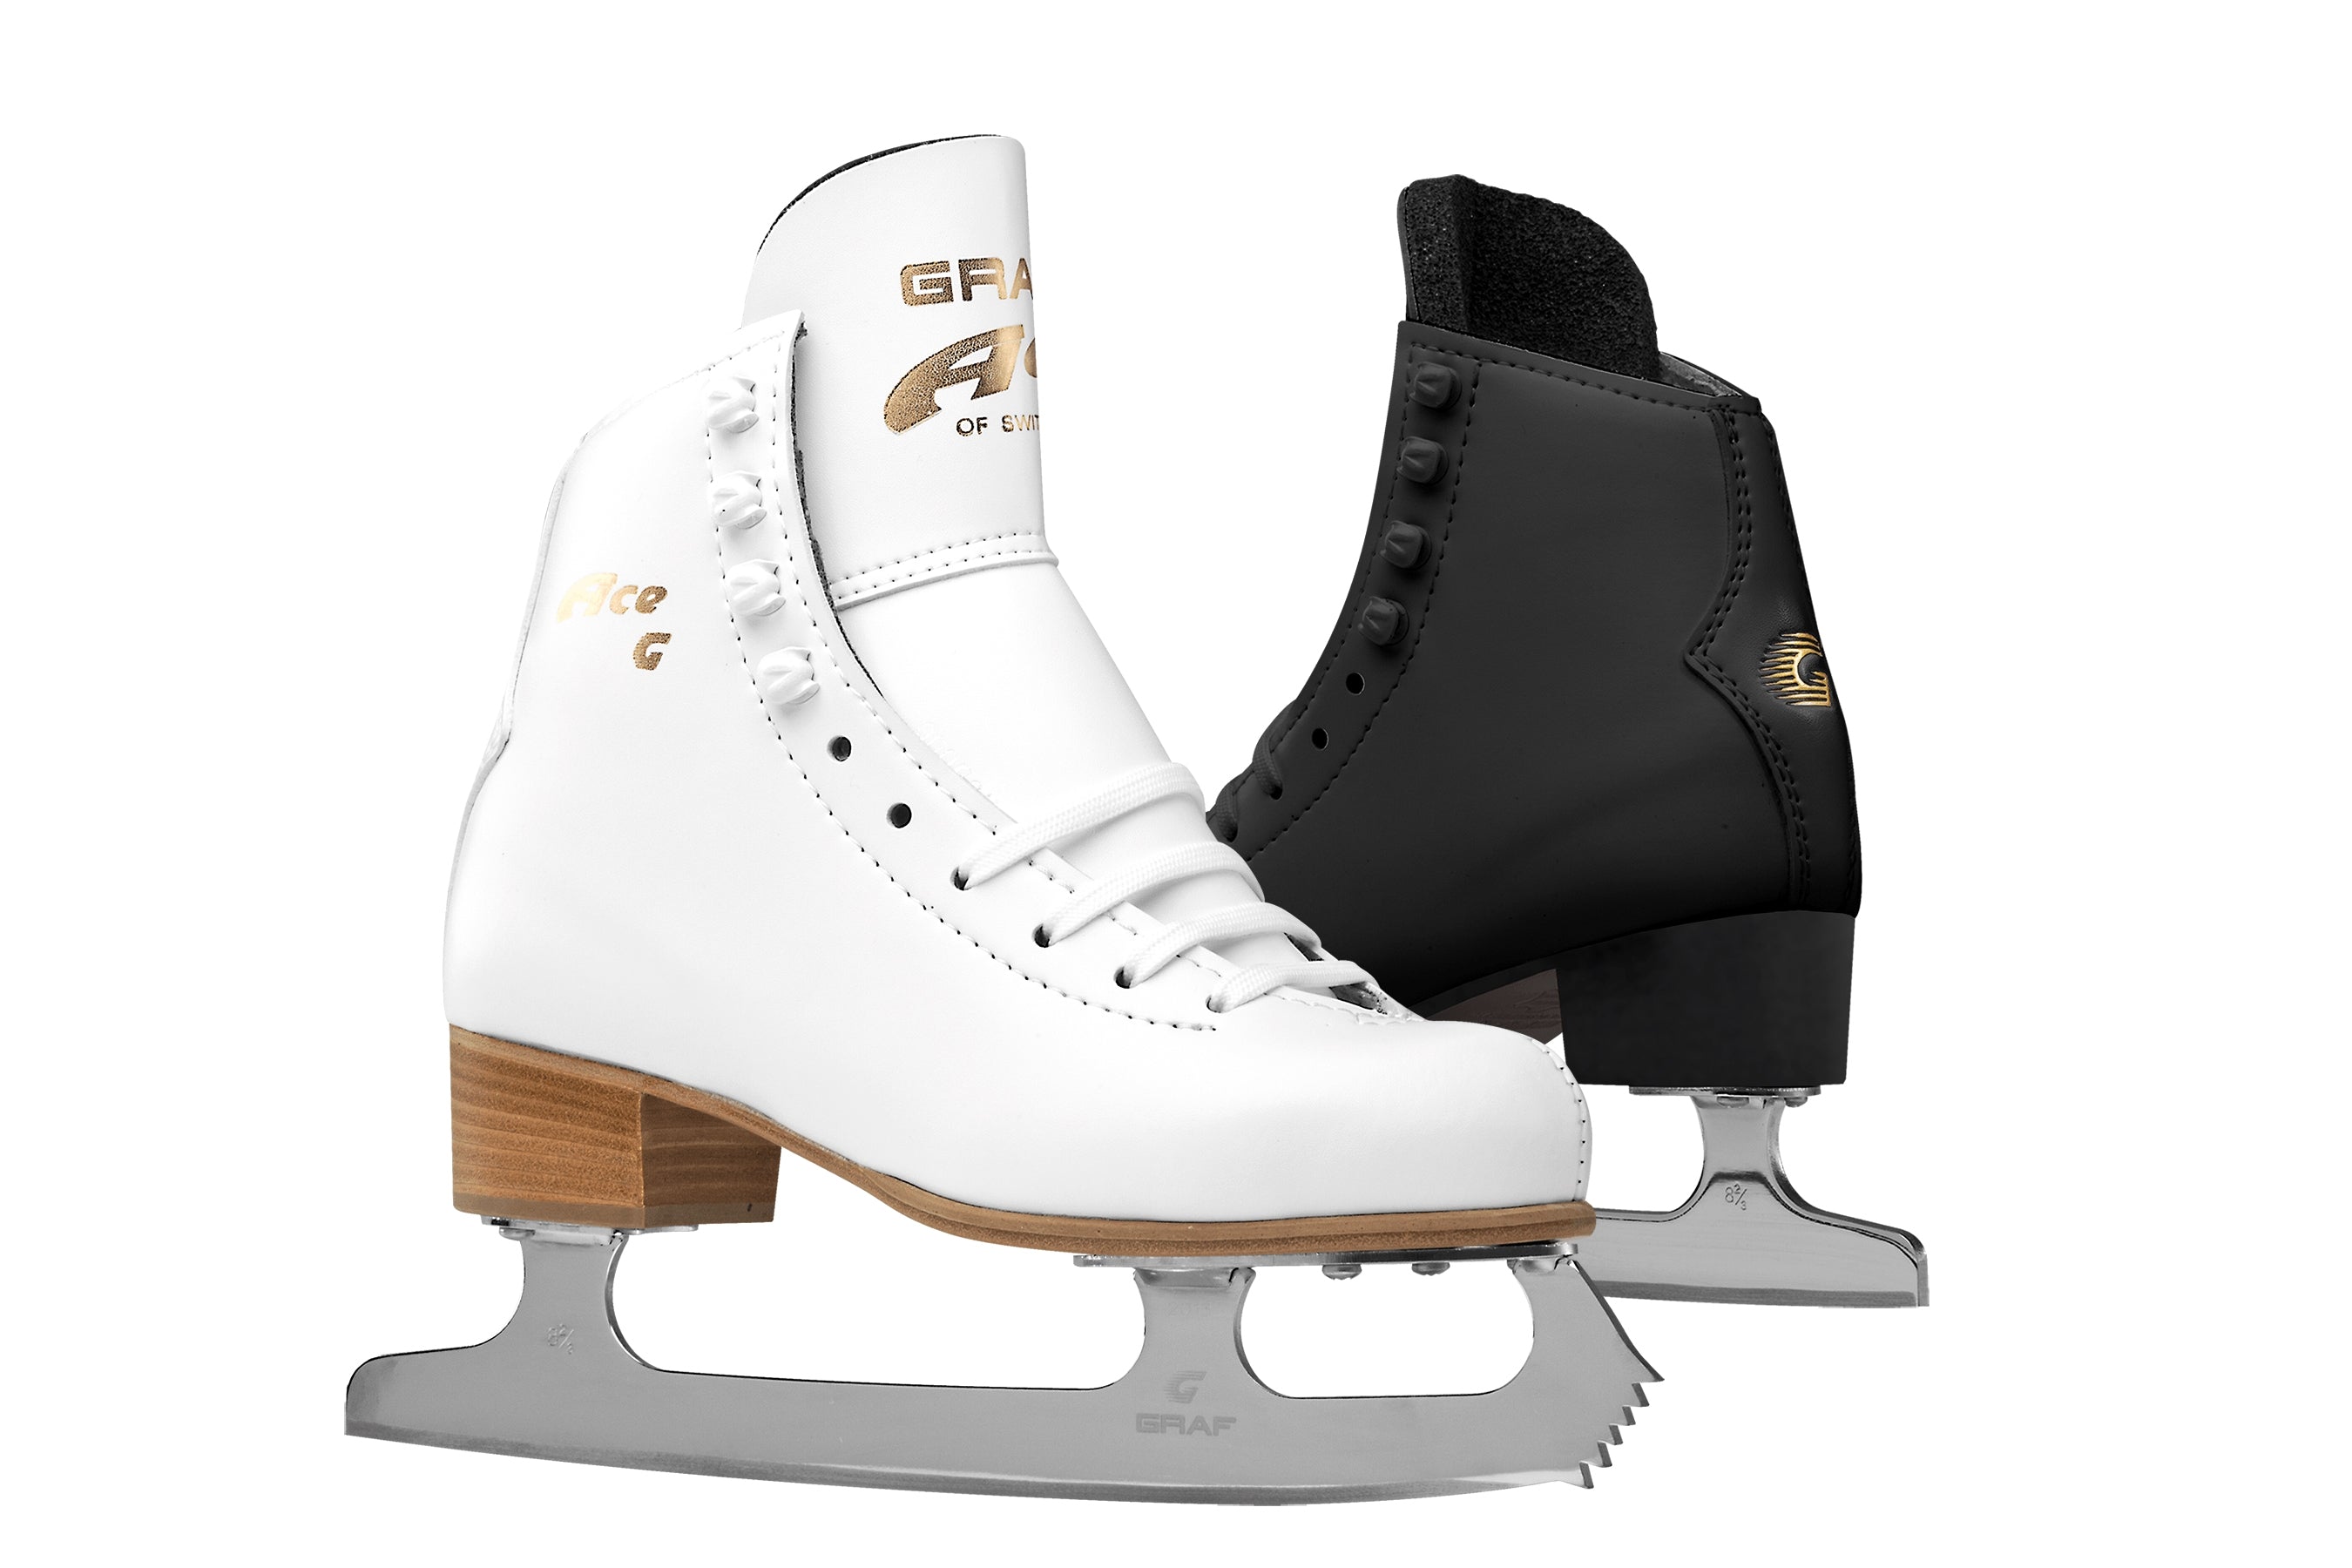 GRAF Ace Figure Skates Northern Ice and Dance